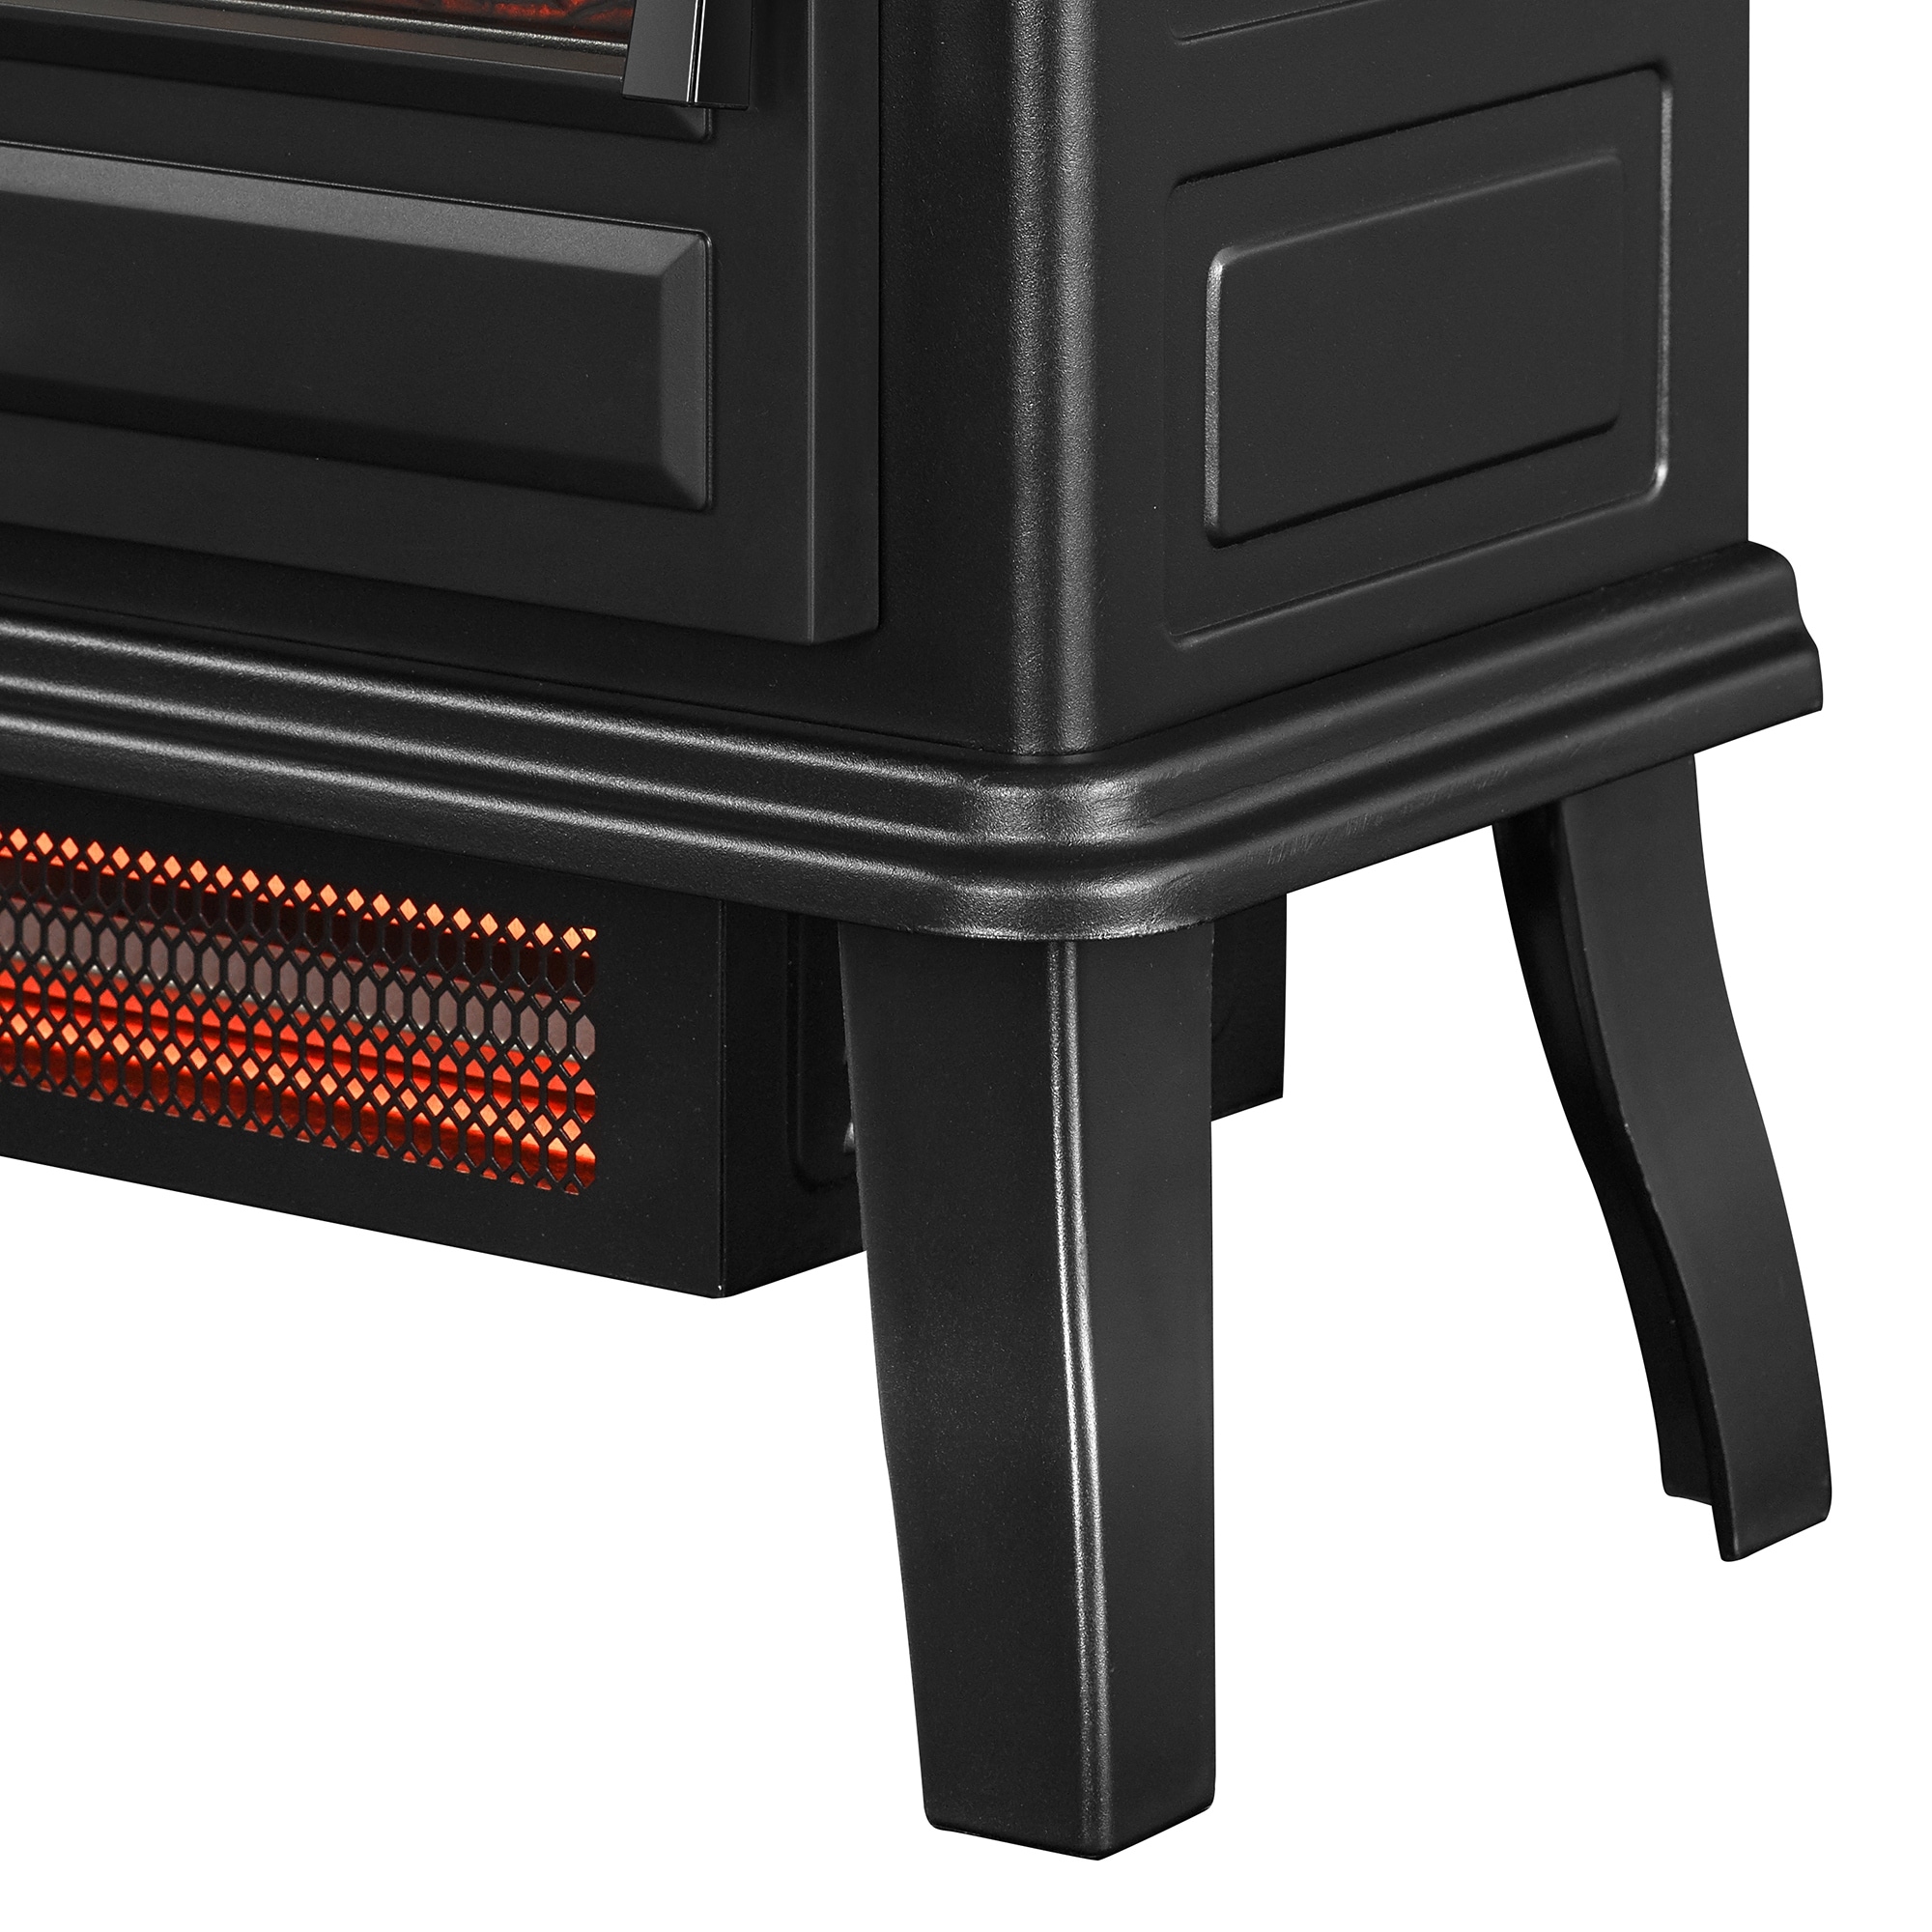 Duraflame Infrared Quartz Electric Fireplace Stove Heater